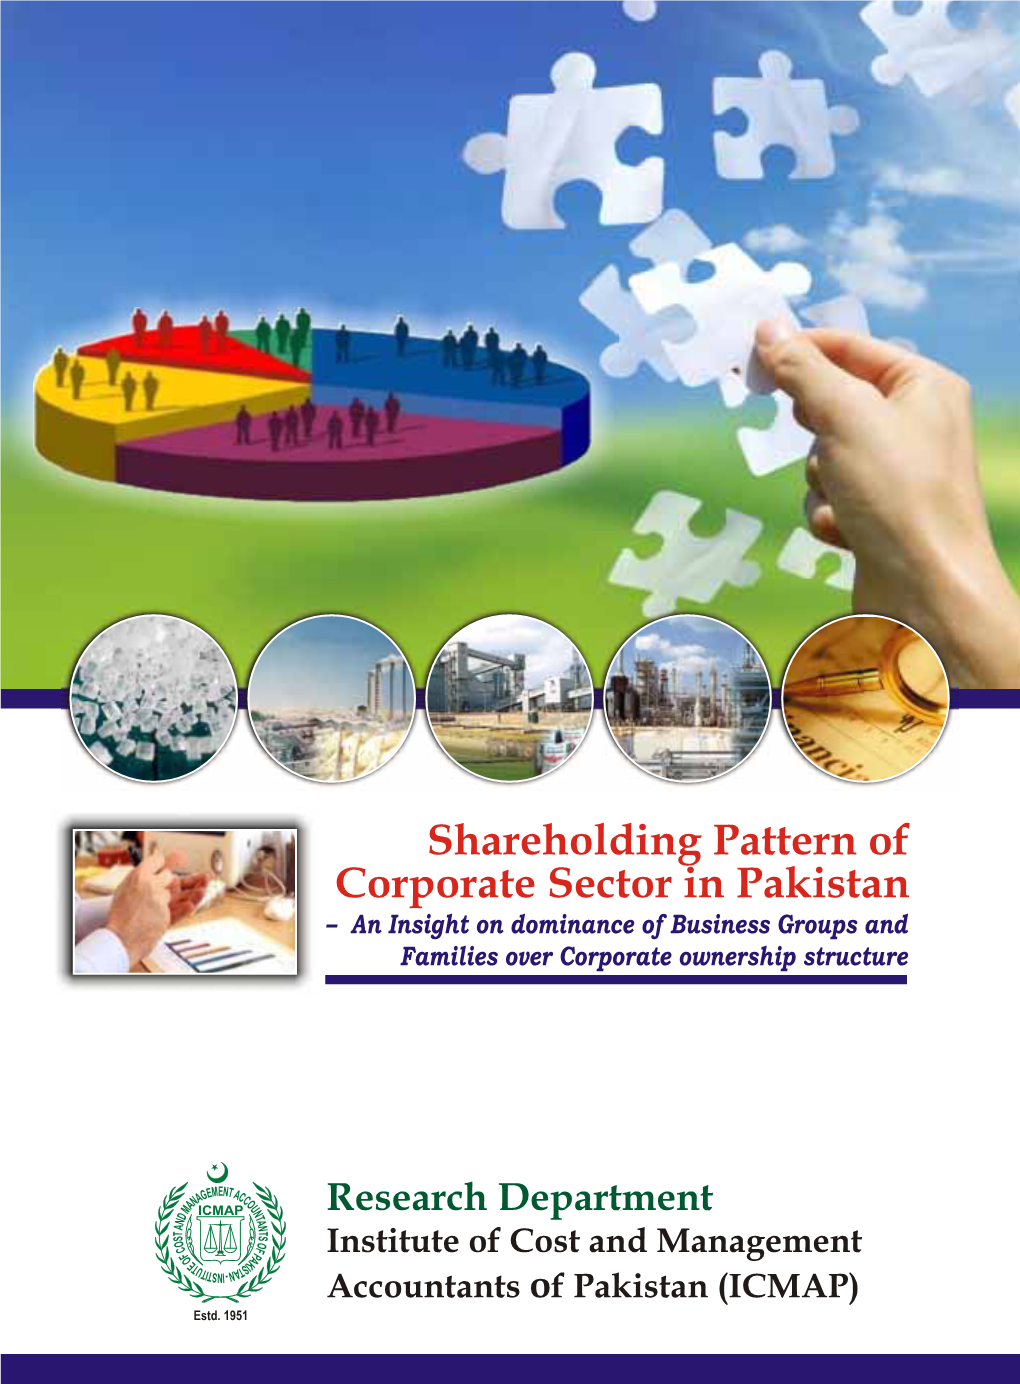 Shareholding Pattern of Corporate Sector in Pakistan – an Insight on Dominance of Business Groups and Families Over Corporate Ownership Structure